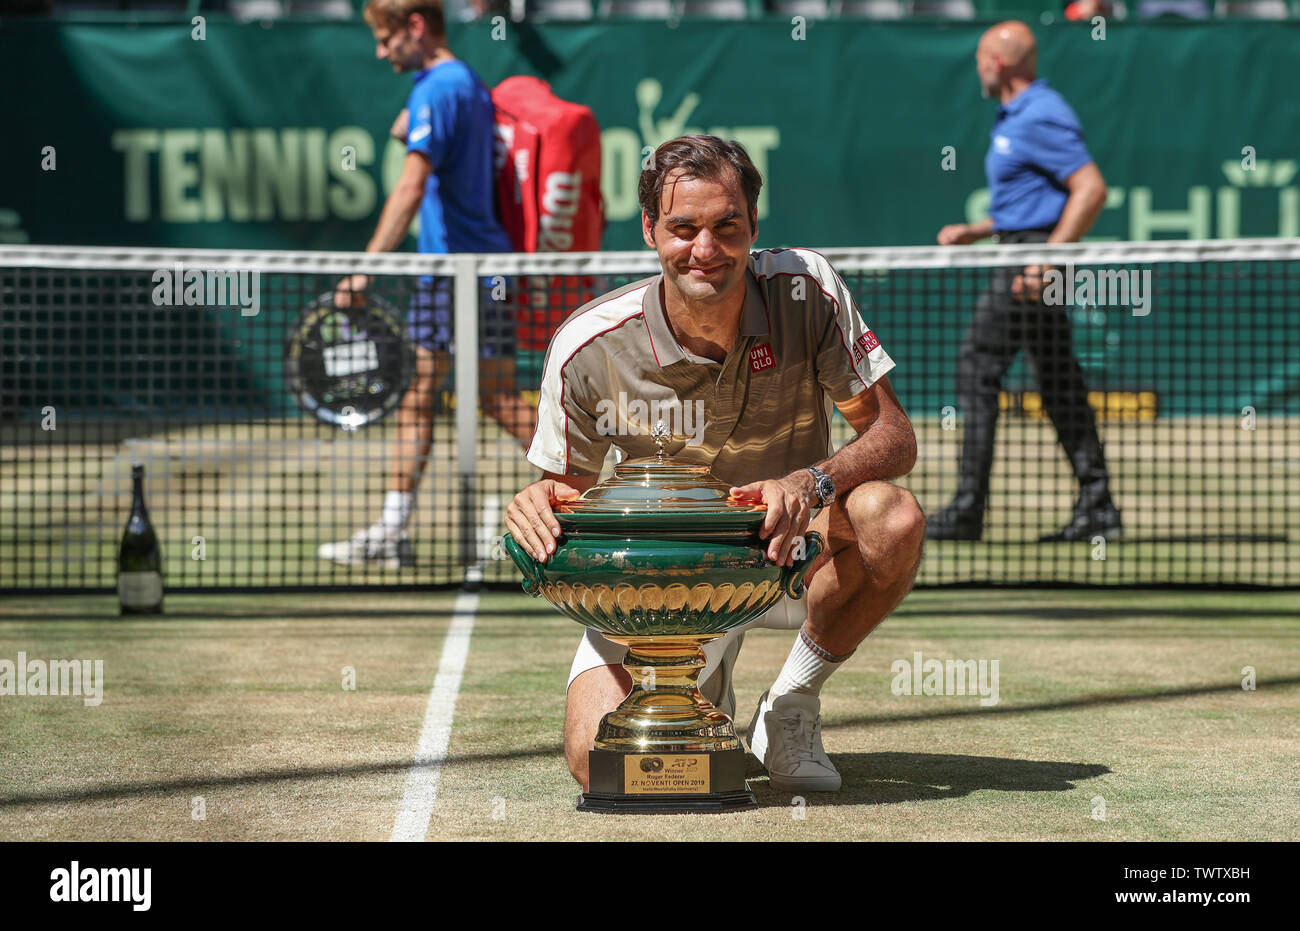 Halle, Germany. 23rd June, 2019. Tennis: ATP-Tour singles, men, final,  Federer (Switzerland) - Goffin (Belgium). The winner Roger Federer kneels  next to the trophy after the award ceremony. In the background the